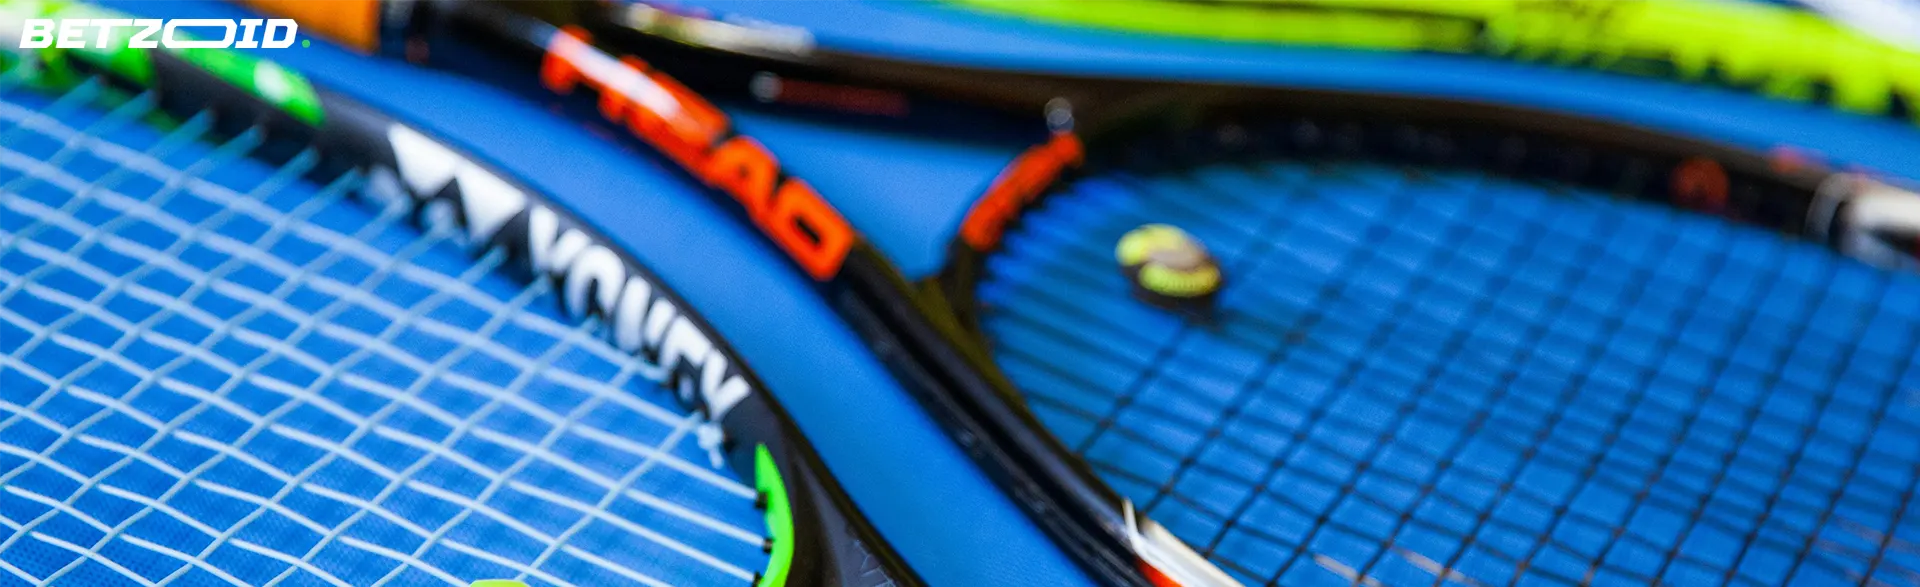 Close-up of tennis rackets and tennis balls on a blue court surface, symbolizing Manitoba best sportsbooks.